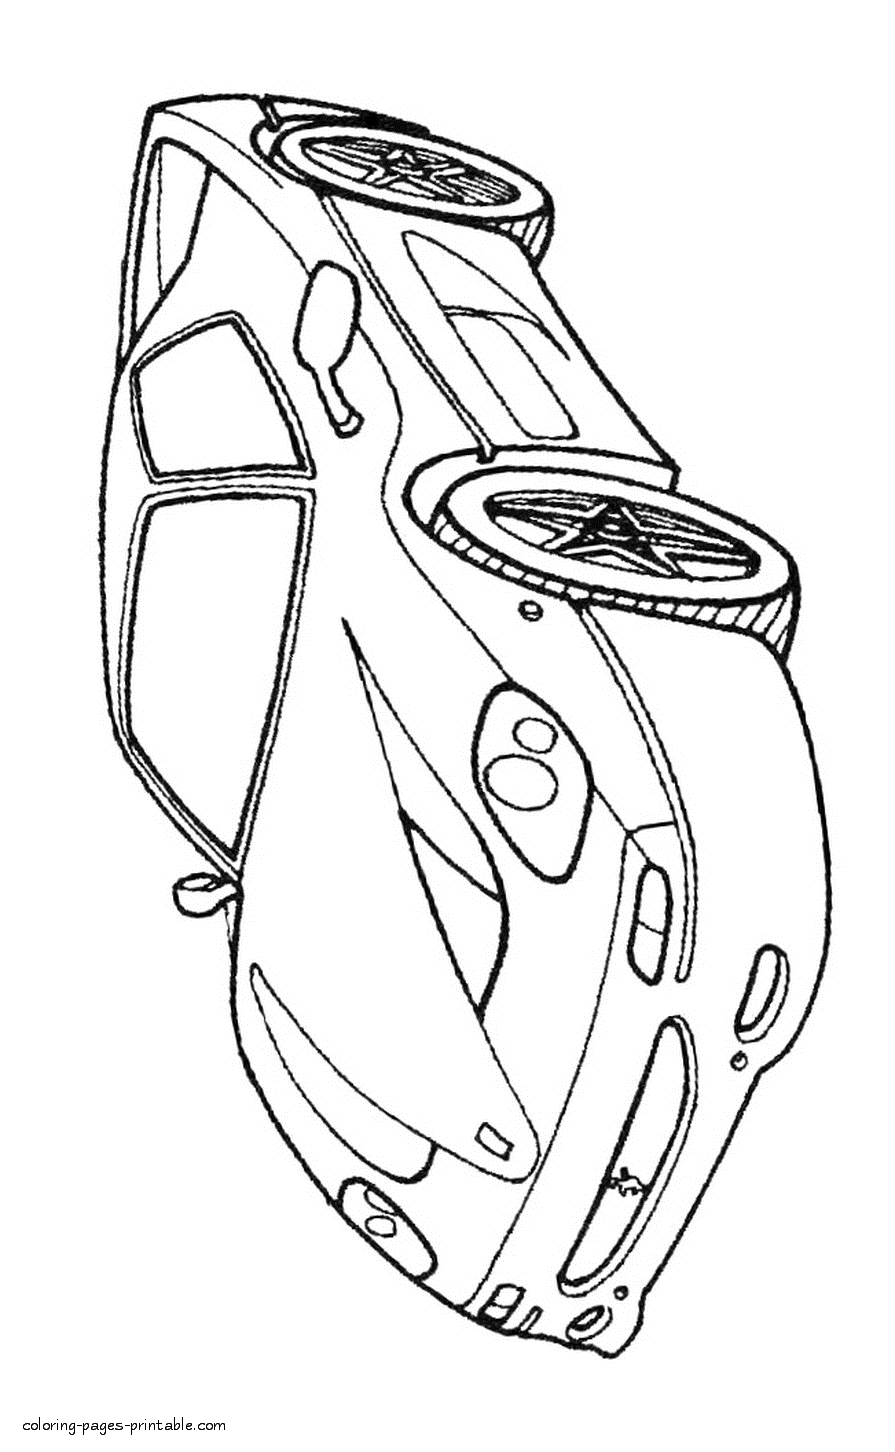 Ferrari printable coloring pages for kids